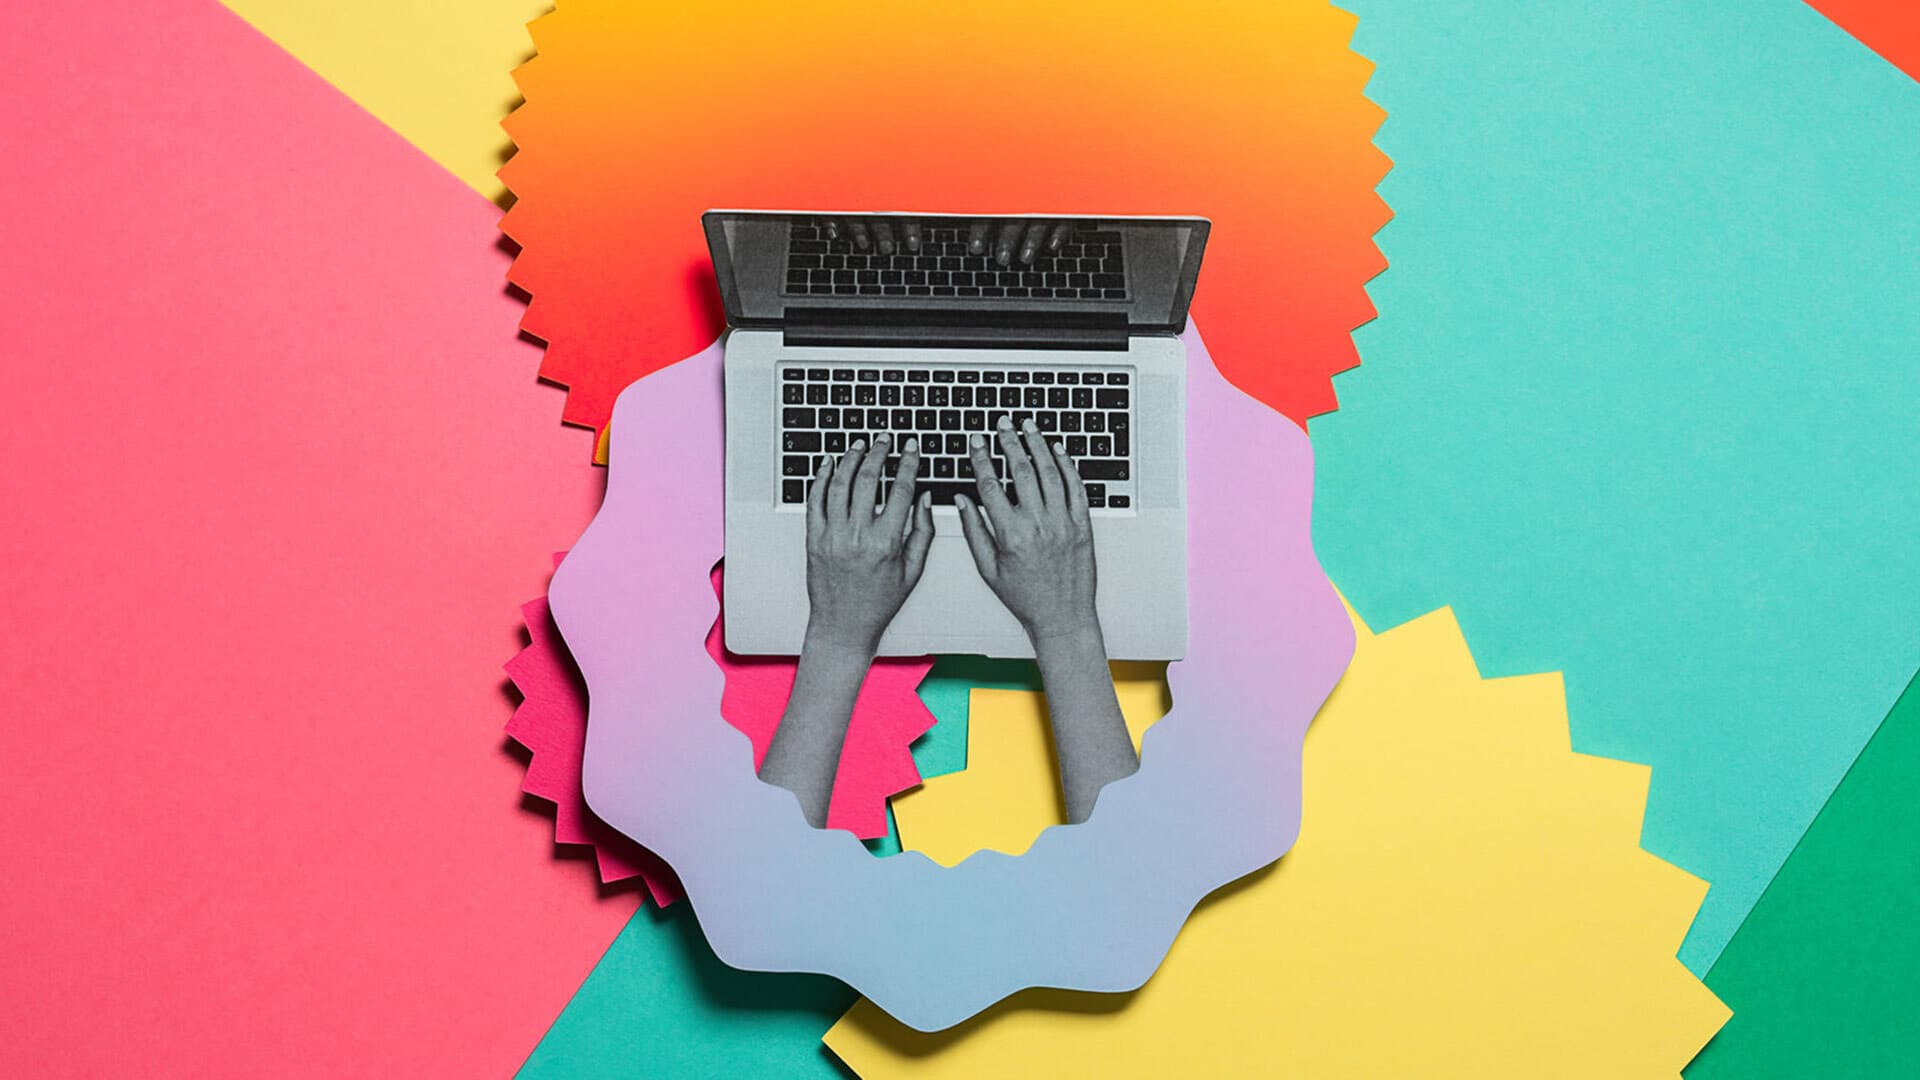 Hands typing on a laptop on a colorful background